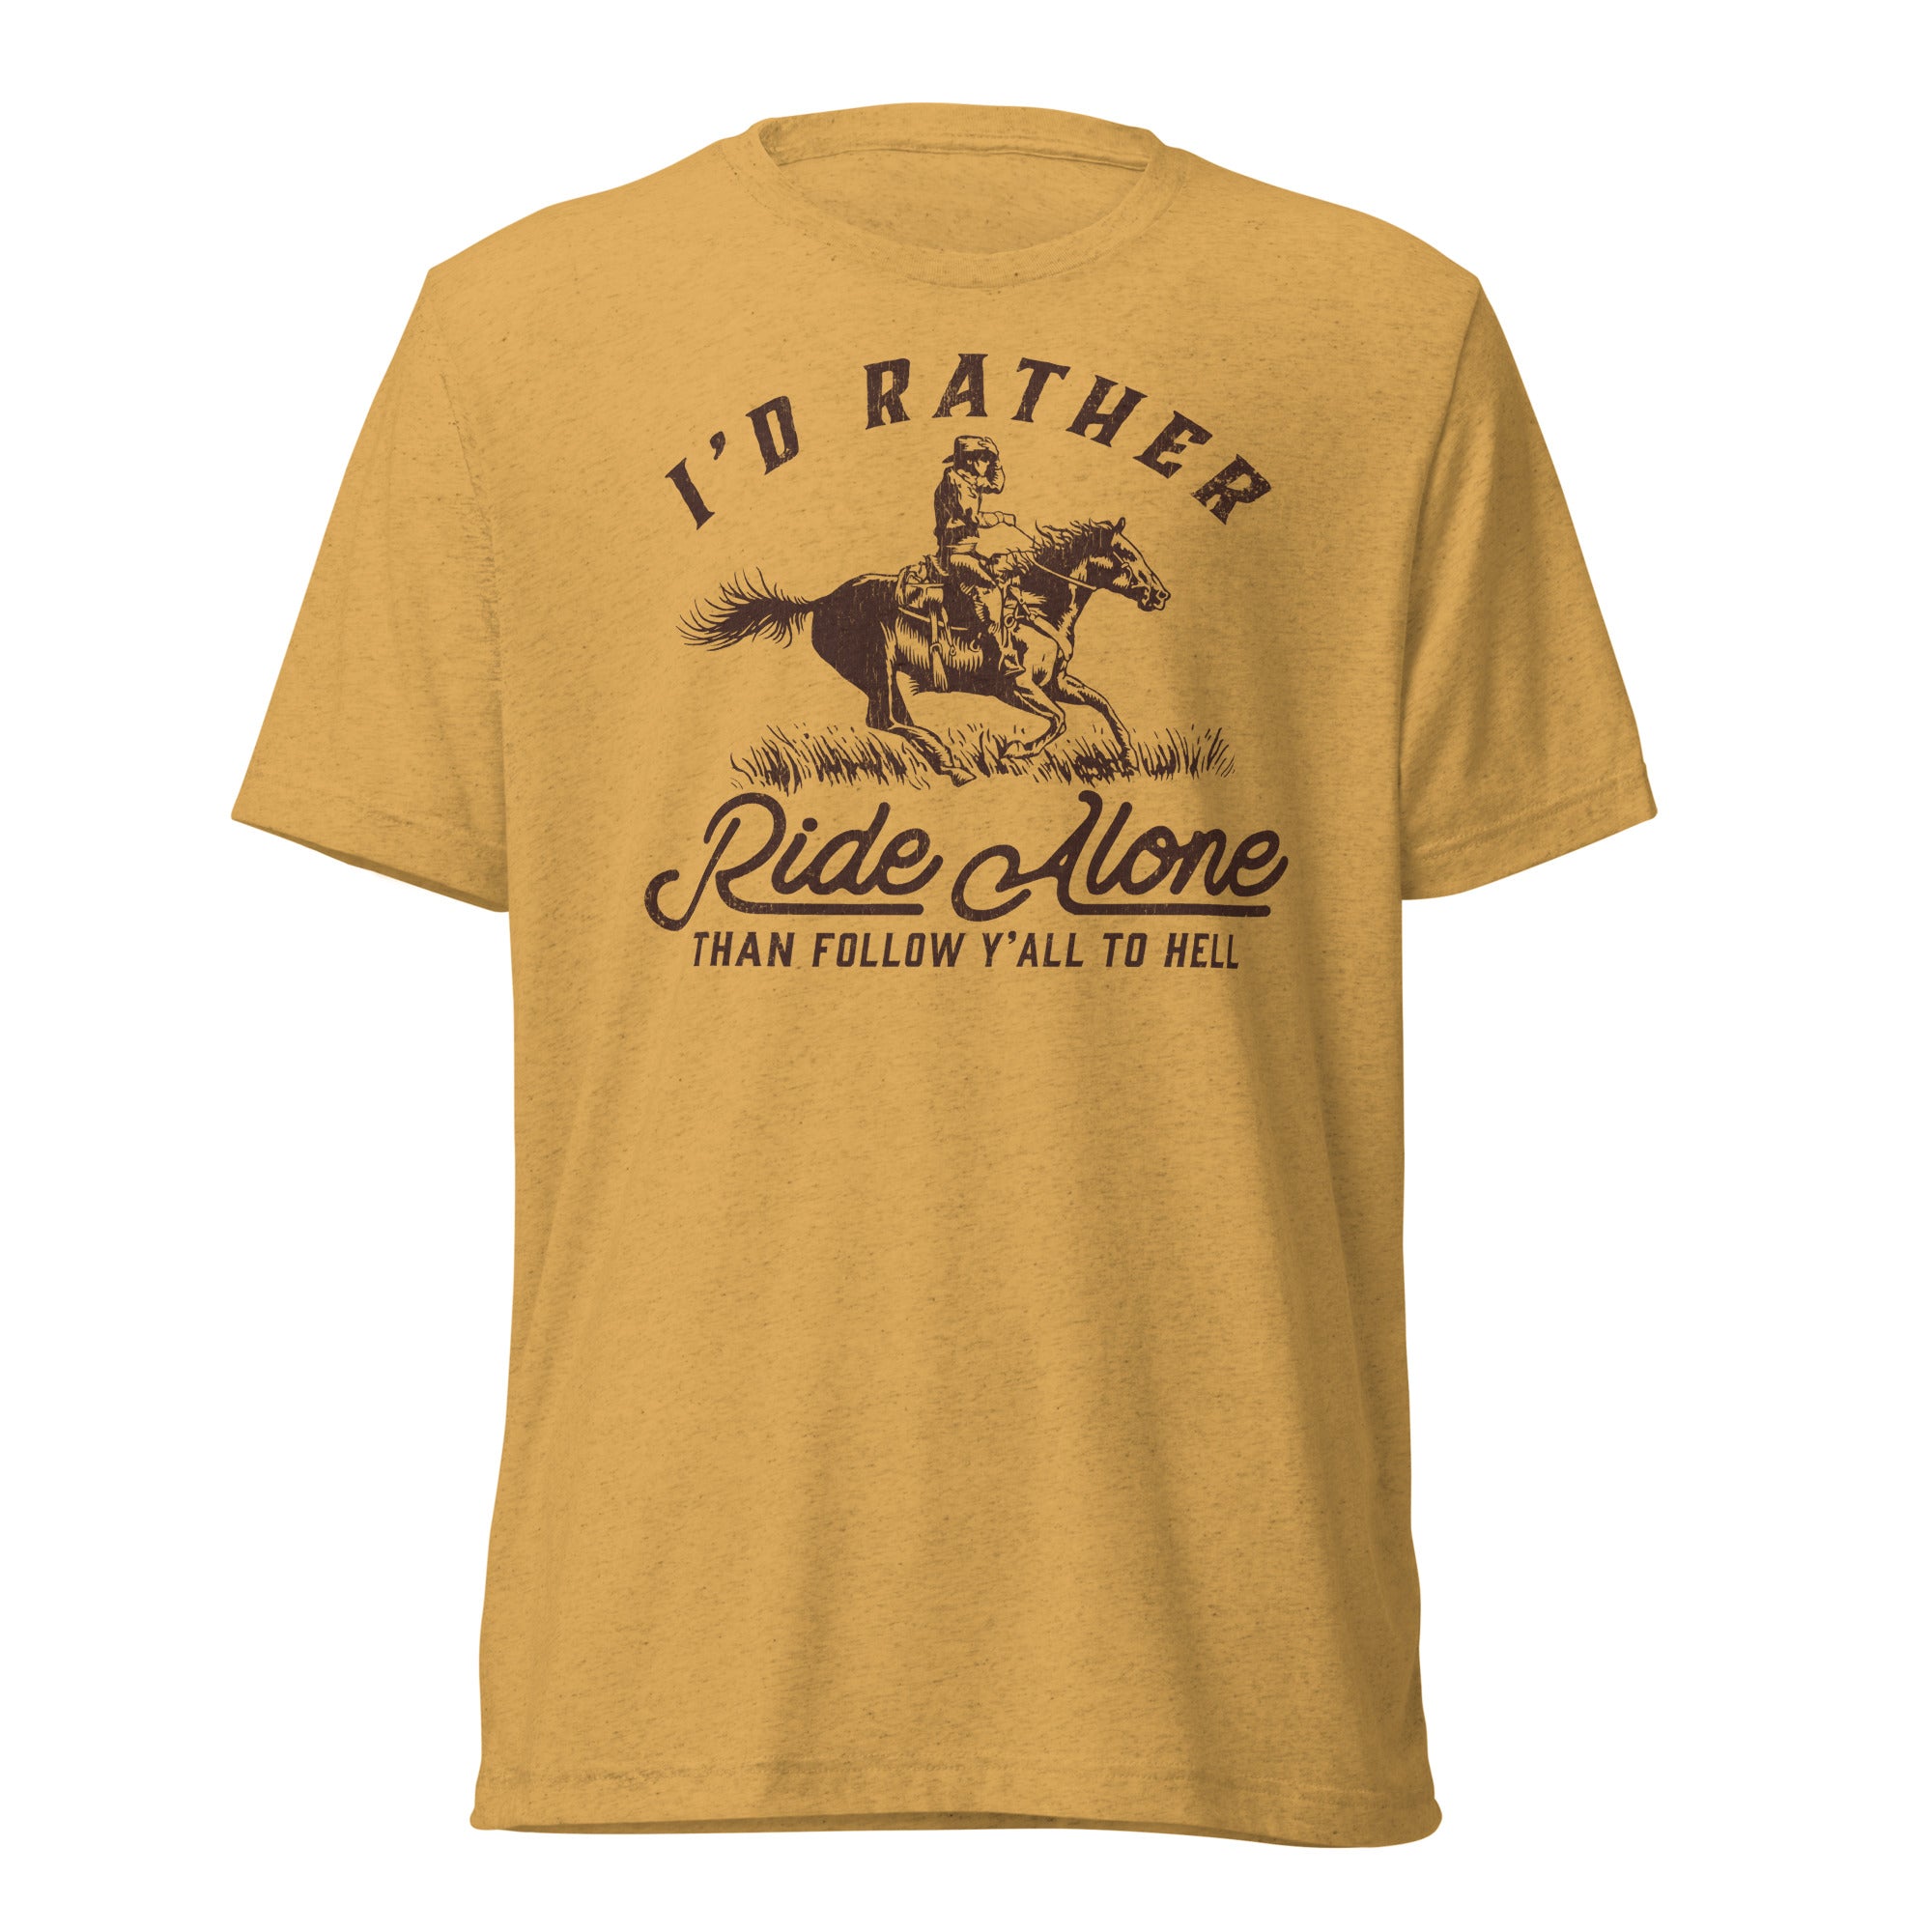 I'd Rather Ride Alone Than Follow Y-All to Hell Tri-blend T-shirt